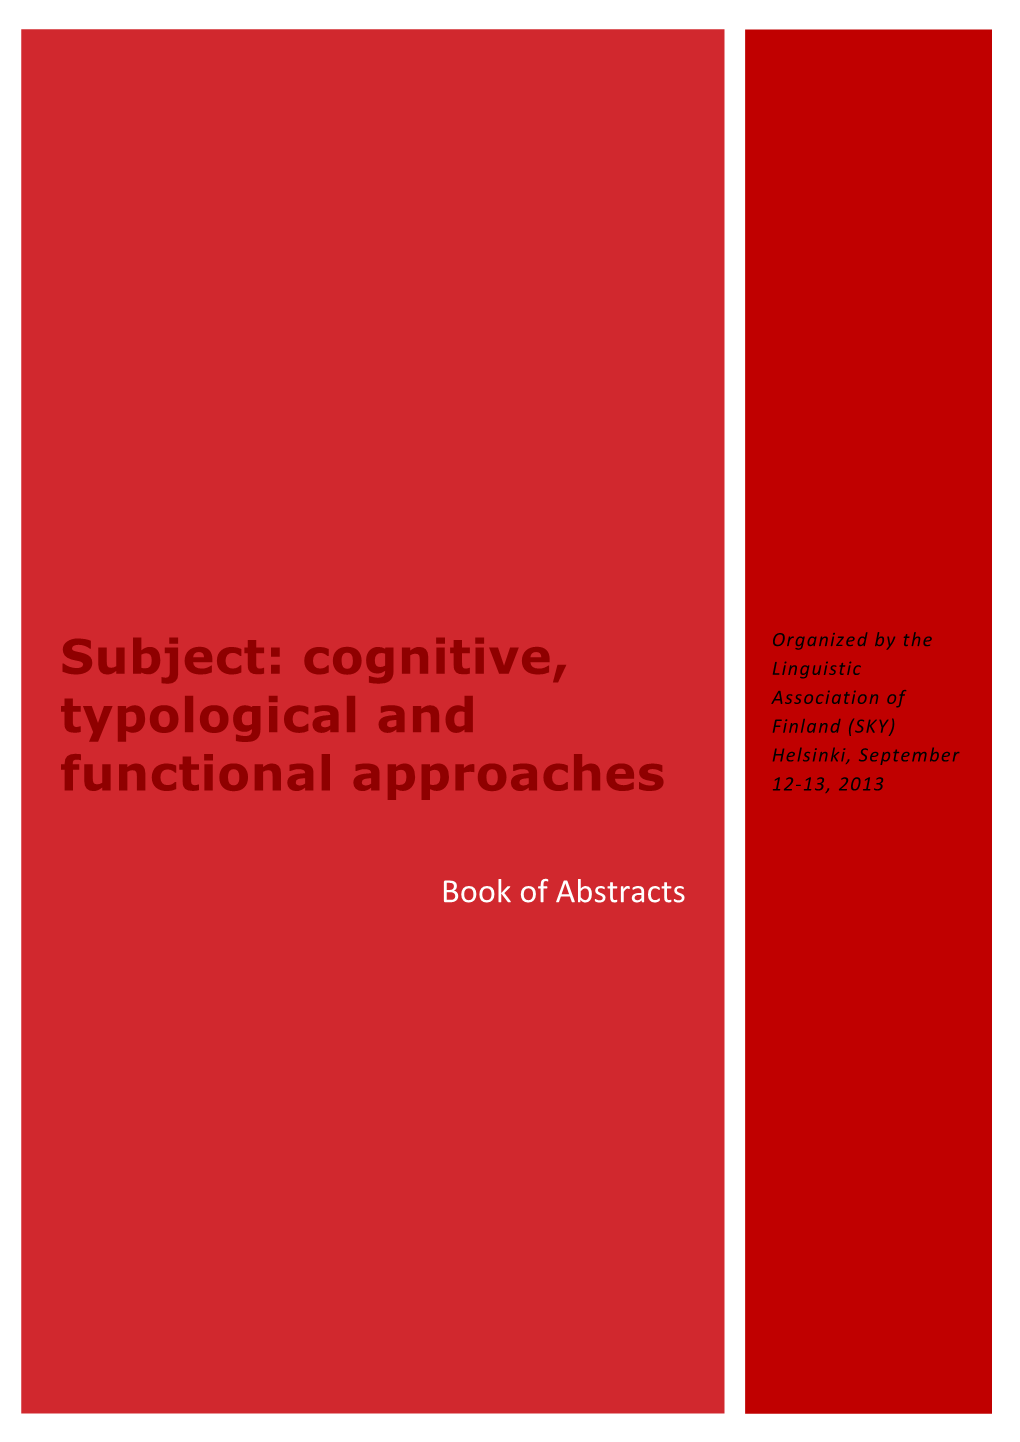 Subject: Cognitive, Typological and Functional Approaches”